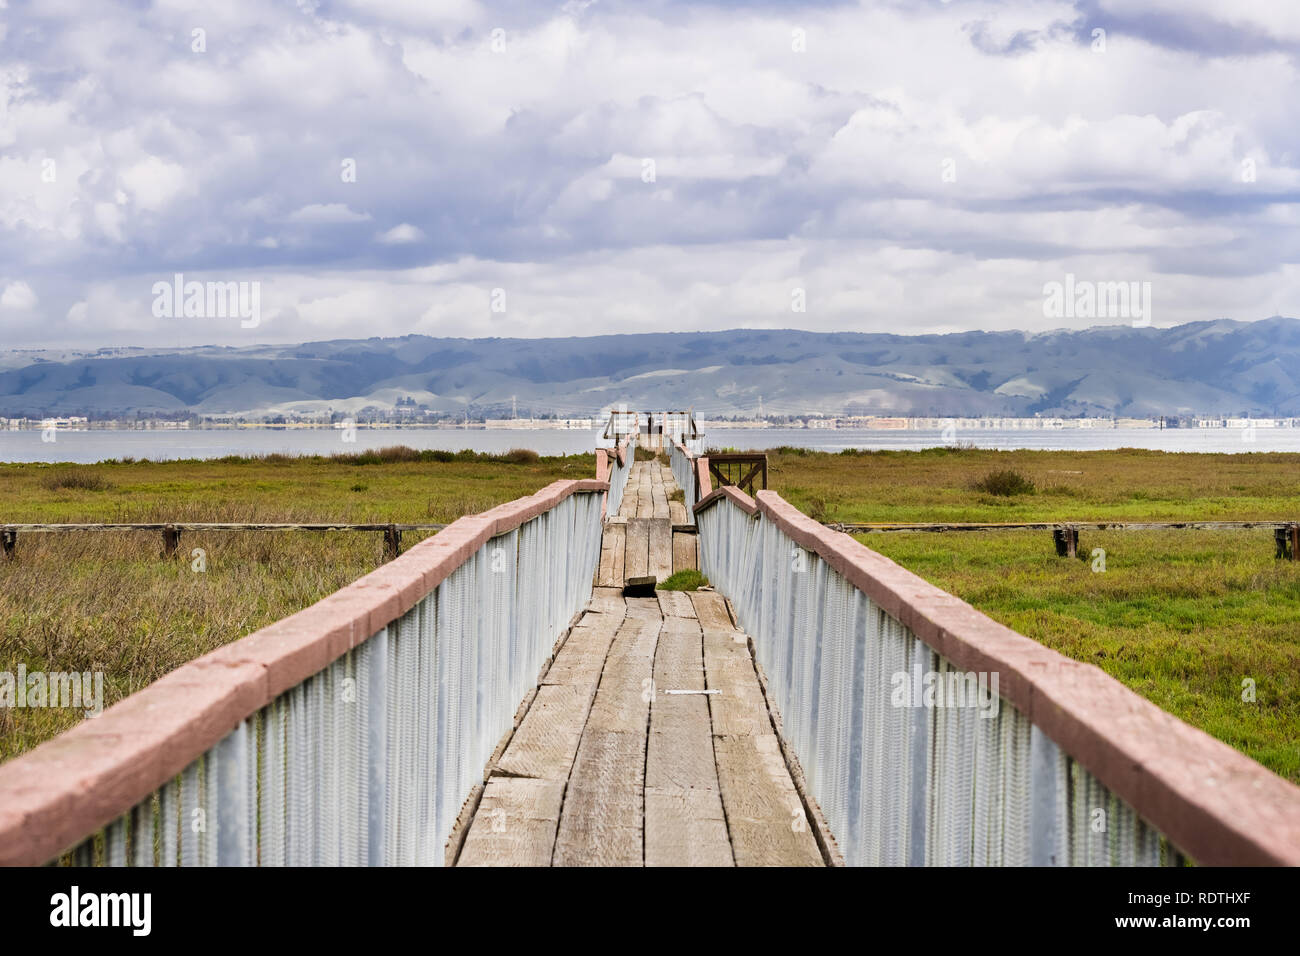 Damaged wooden boardwalk going over the marshes of south San Francisco bay area, Palo Alto Baylands Park, California Stock Photo